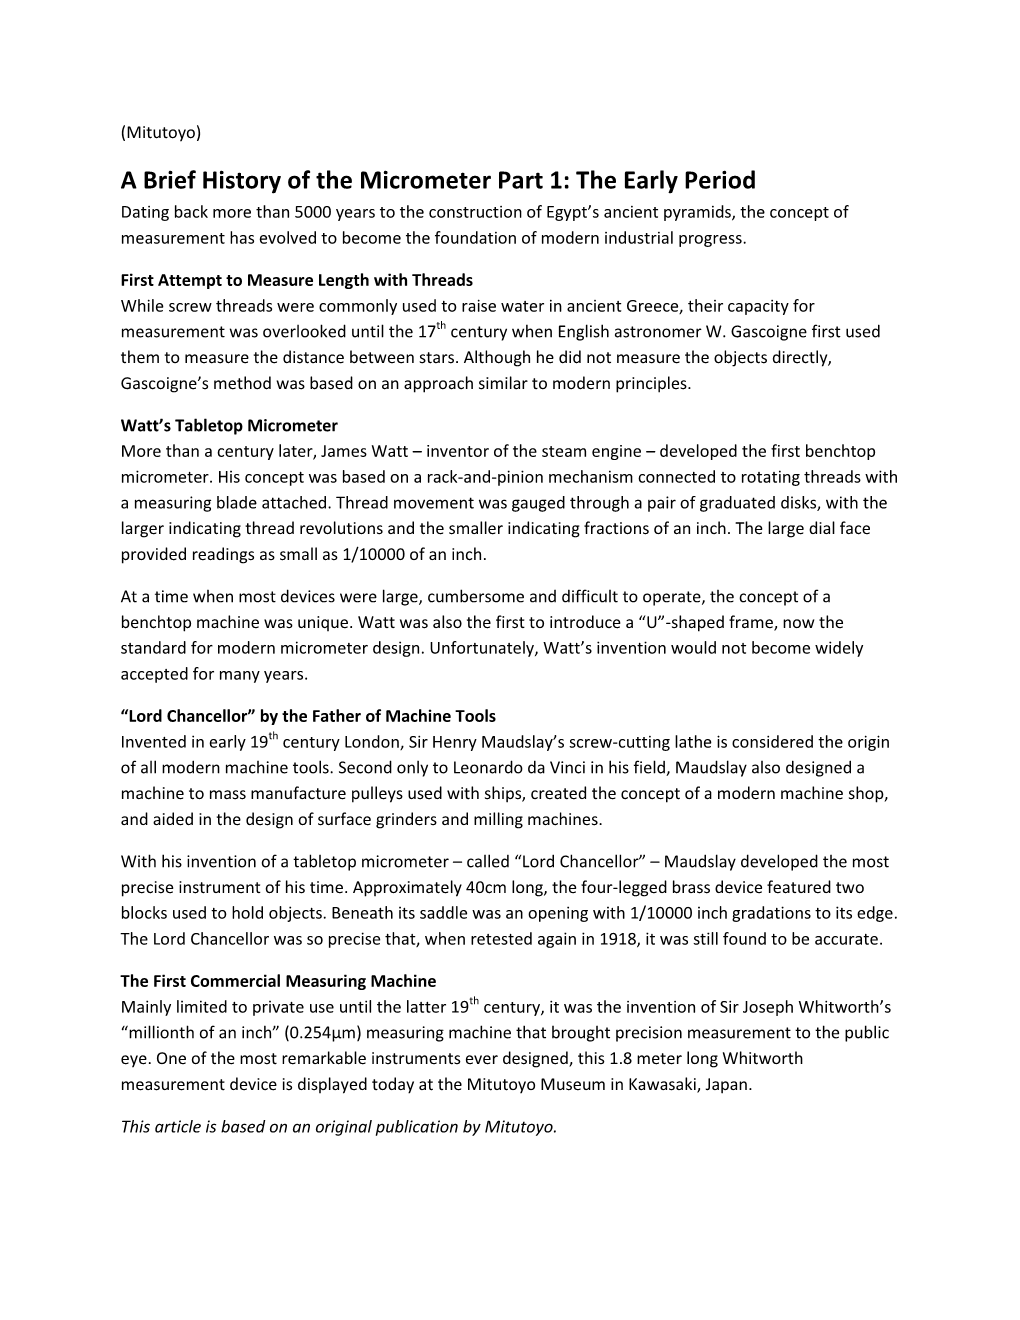 A Brief History of the Micrometer Part 1